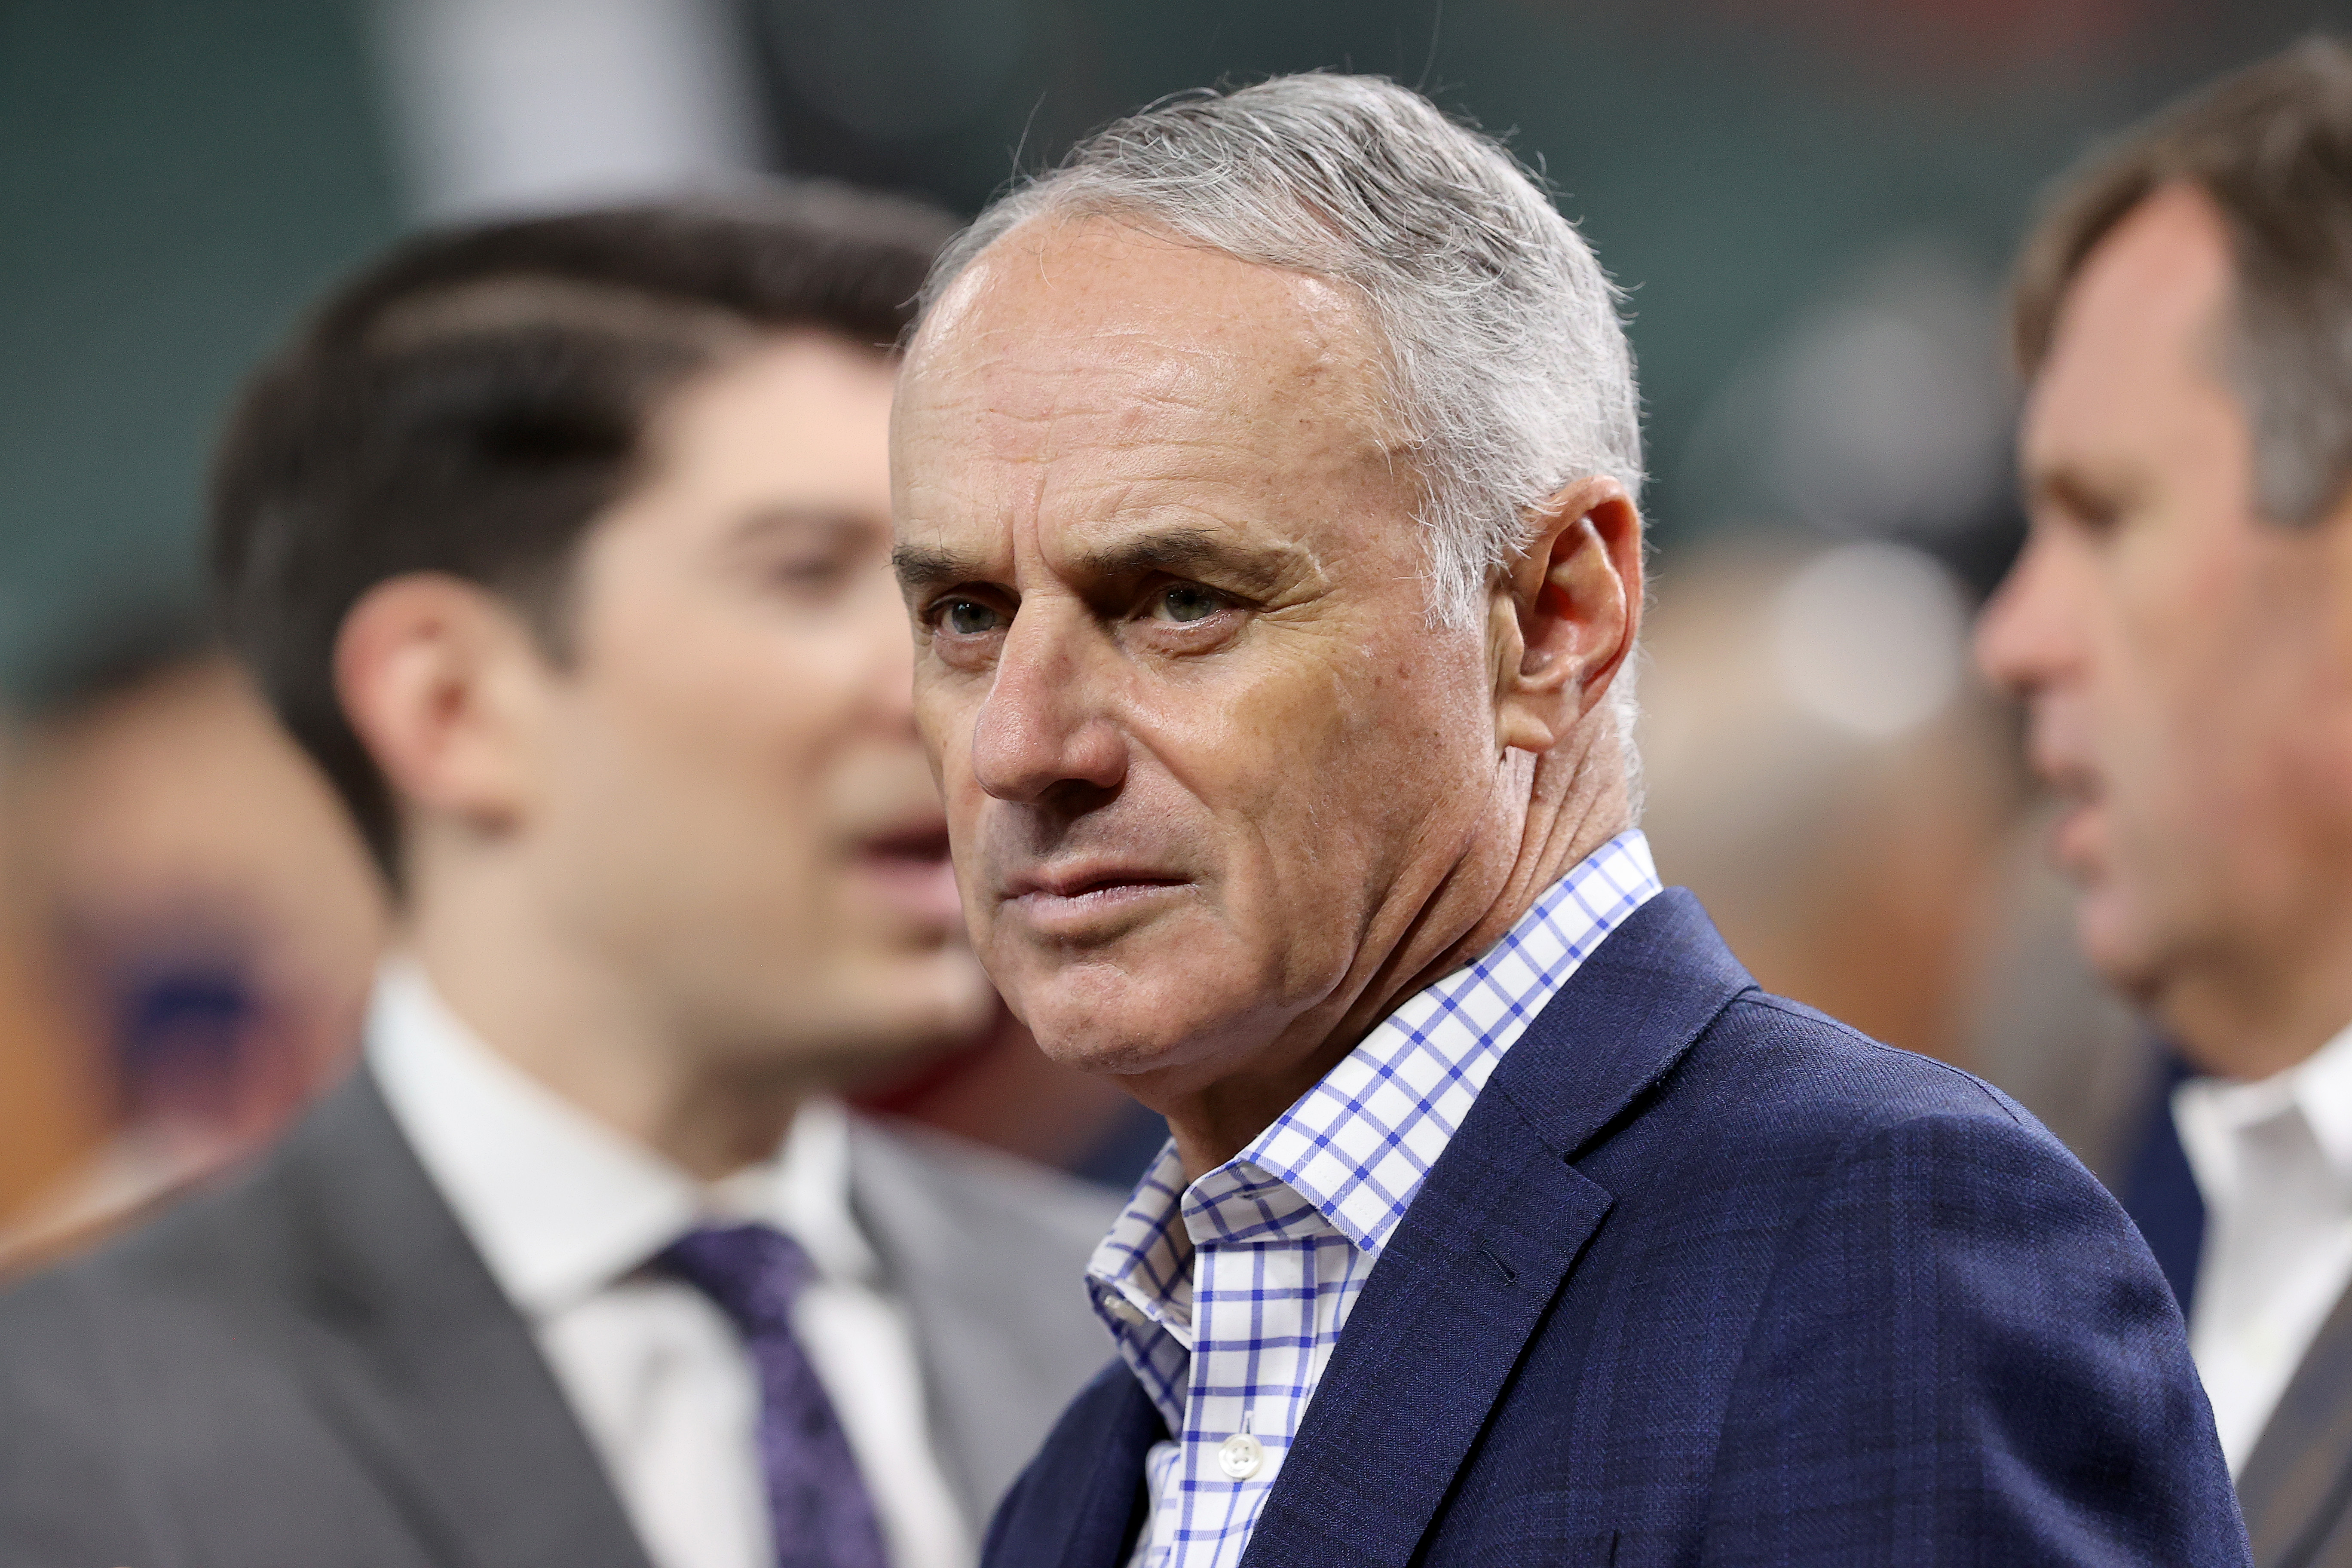 Manfred: Local Native American community 'fully supportive' of Braves